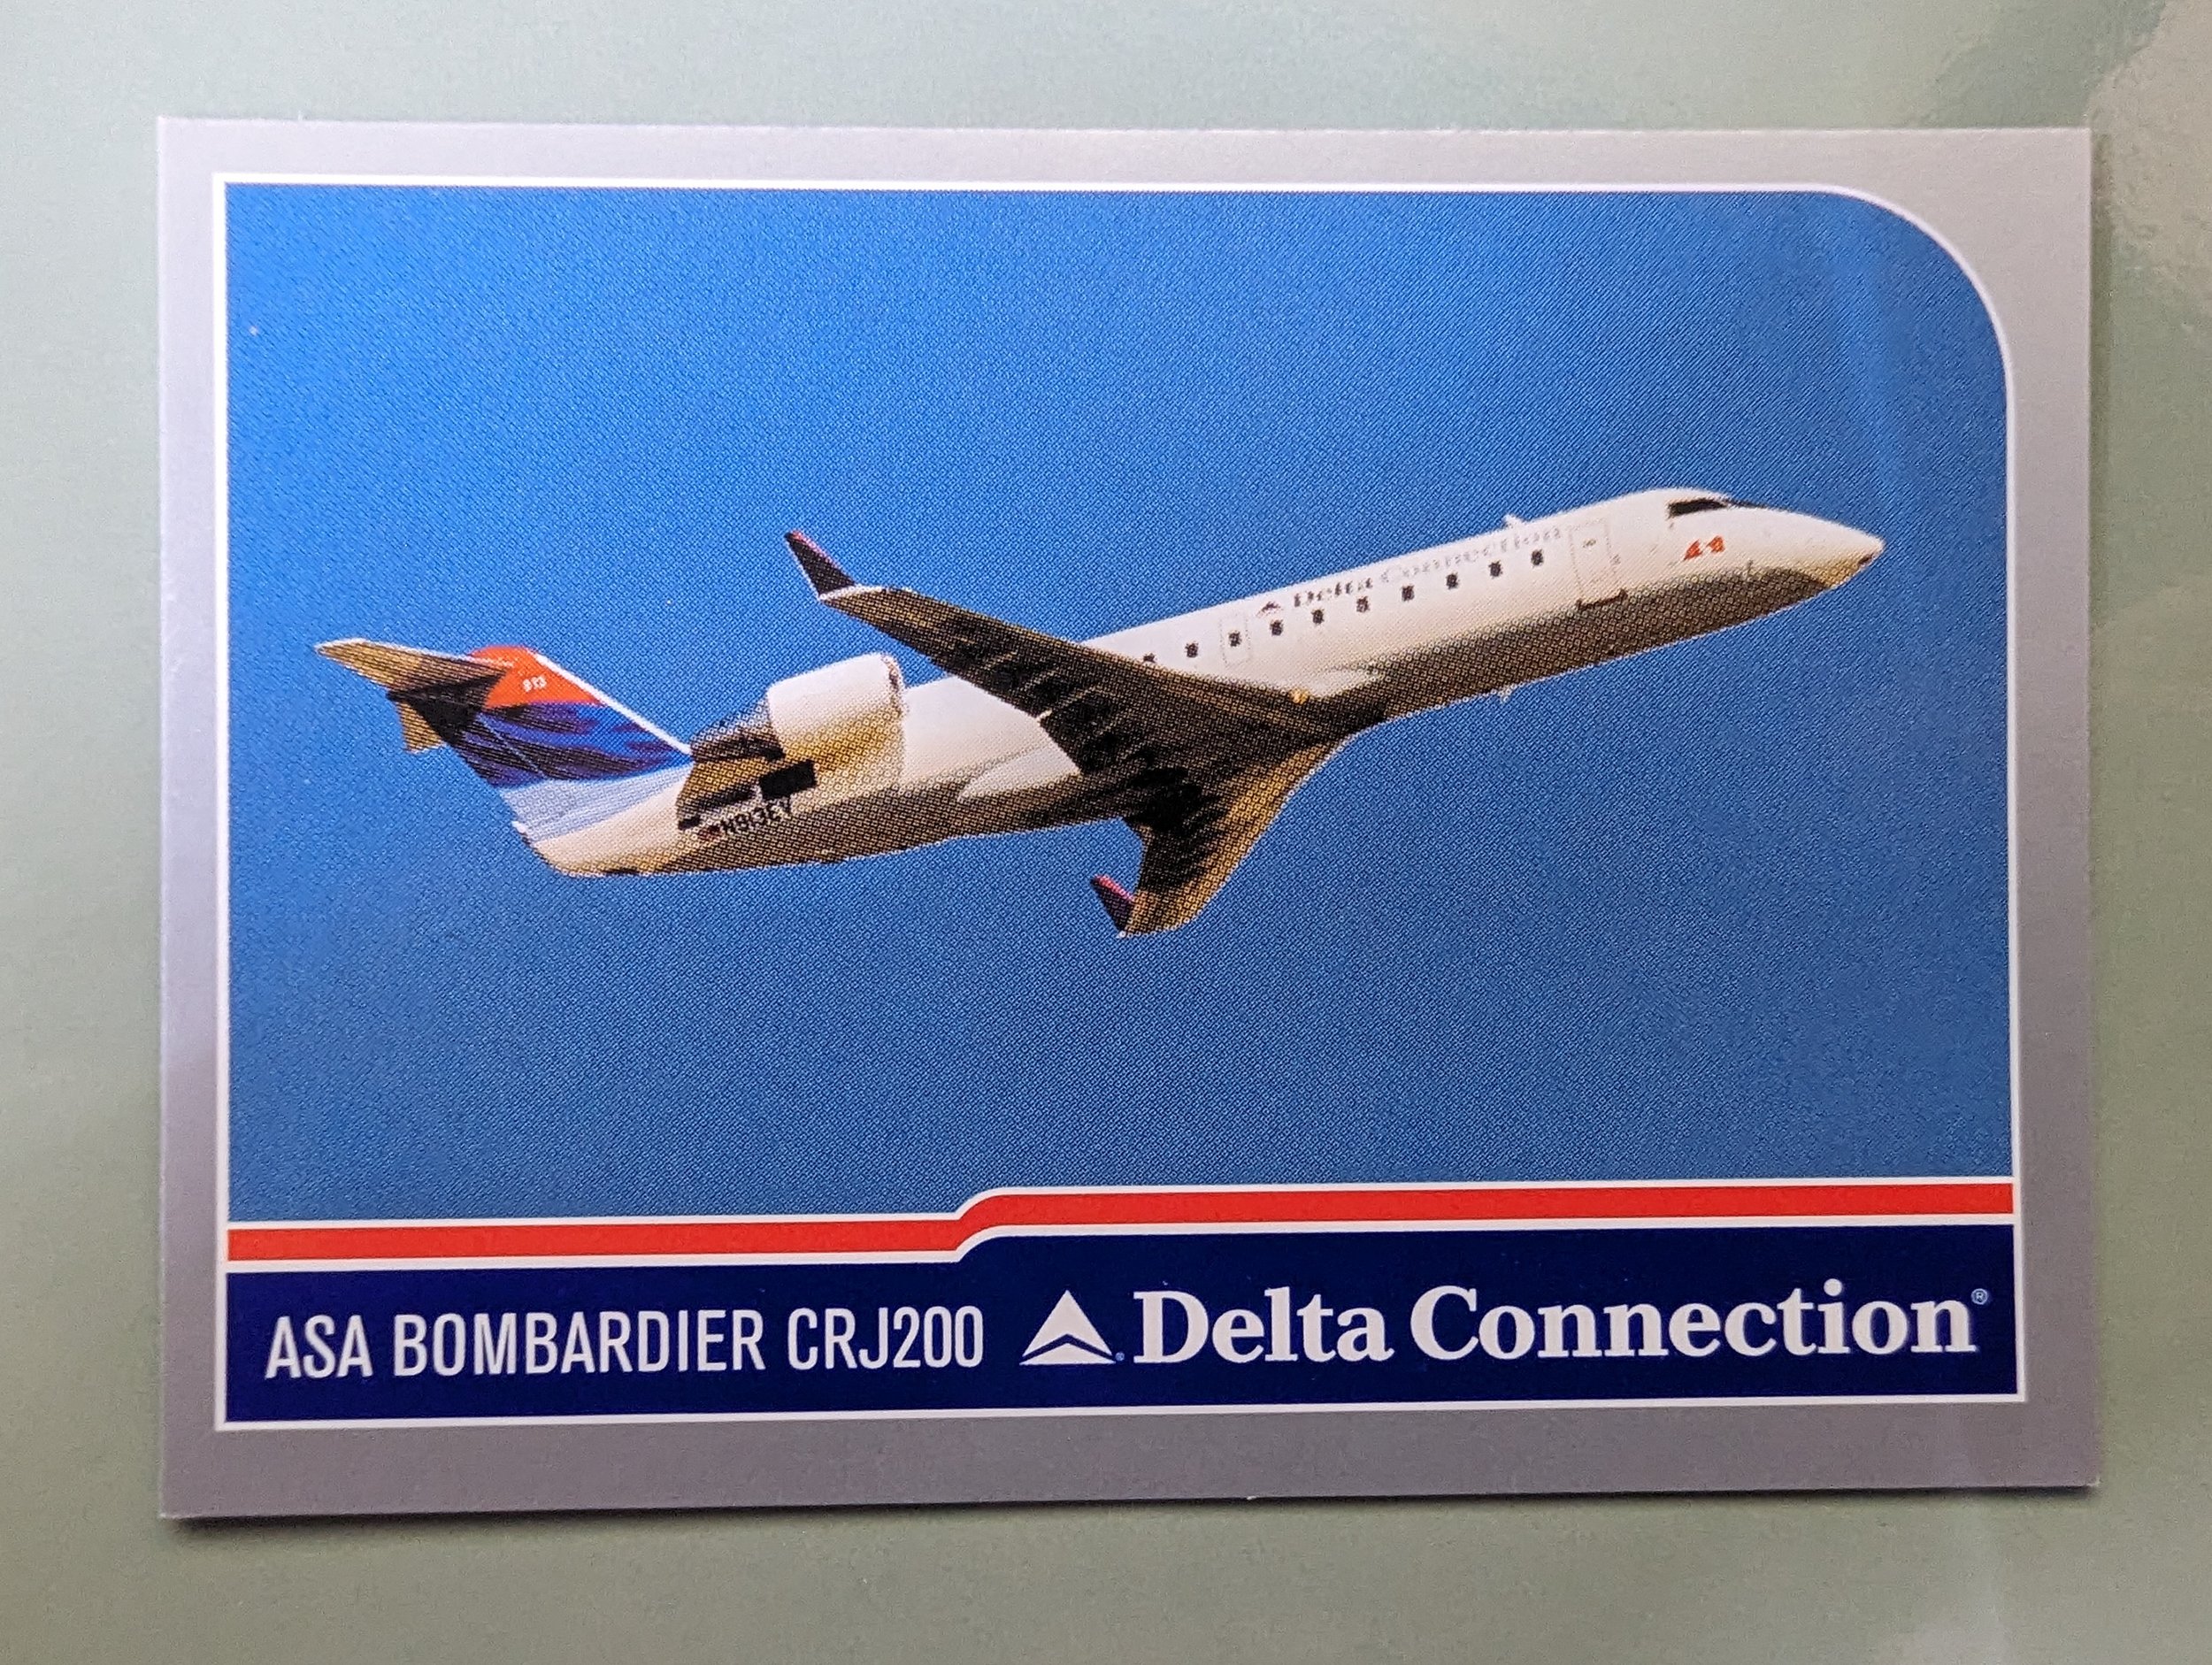 2004 Connections Card #4 CRJ200